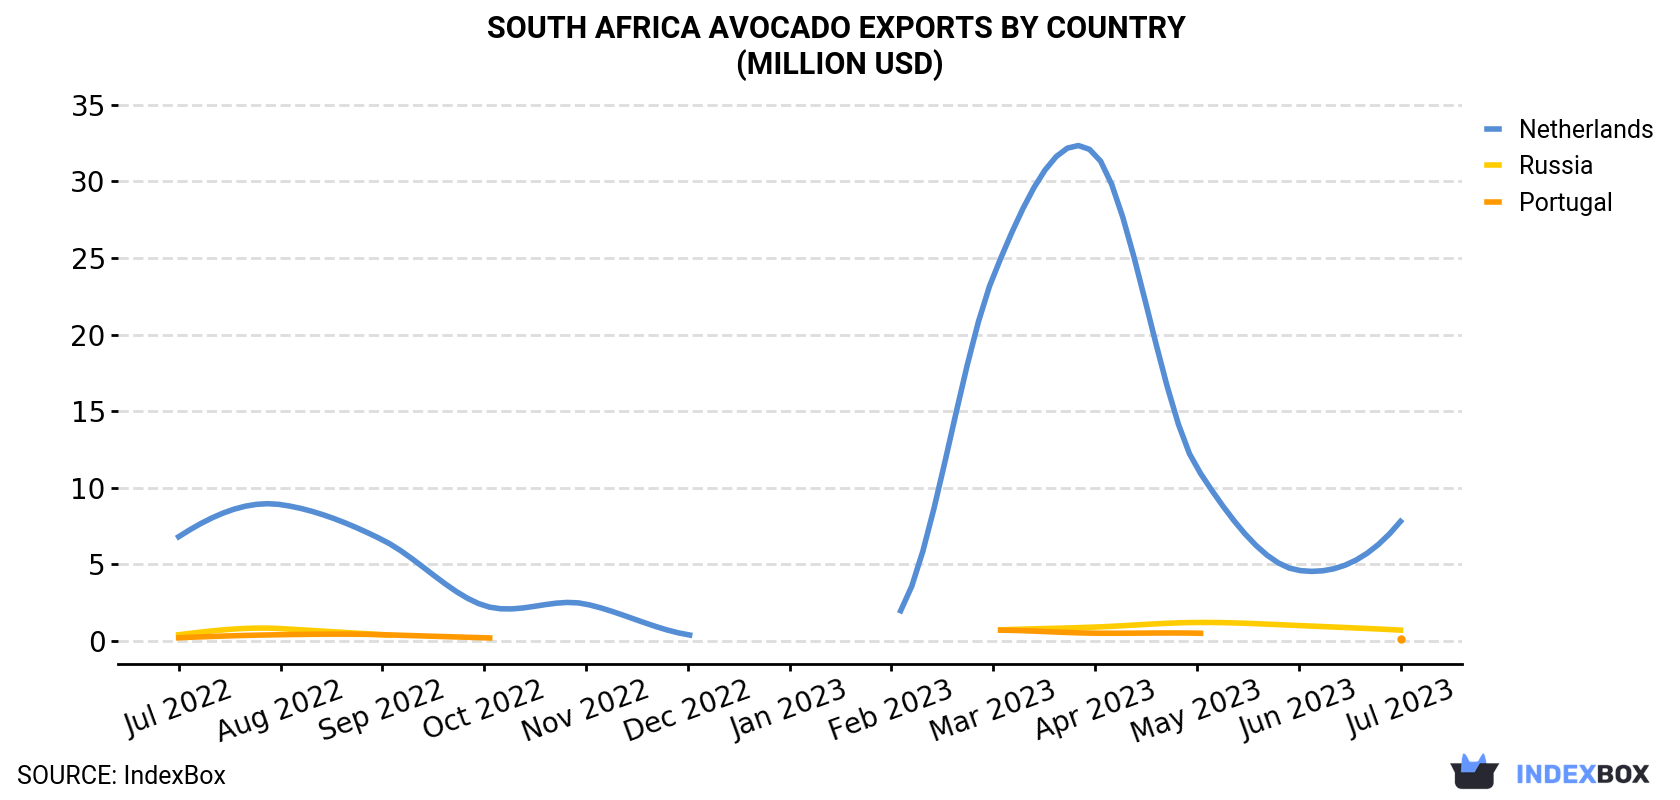 South Africa Avocado Exports By Country (Million USD)